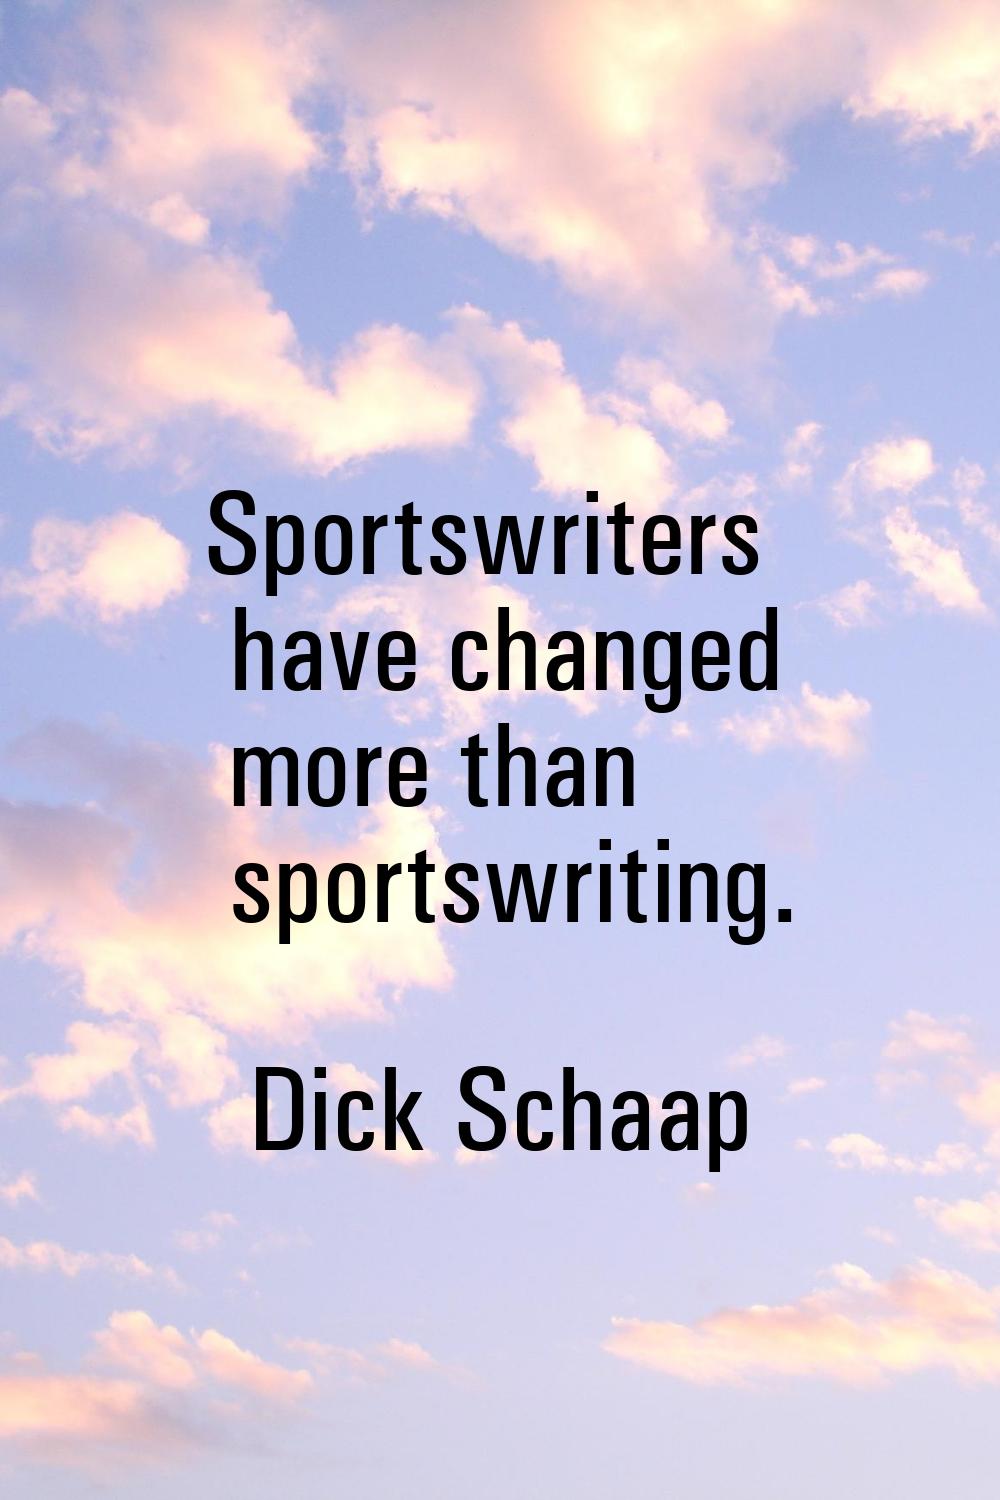 Sportswriters have changed more than sportswriting.